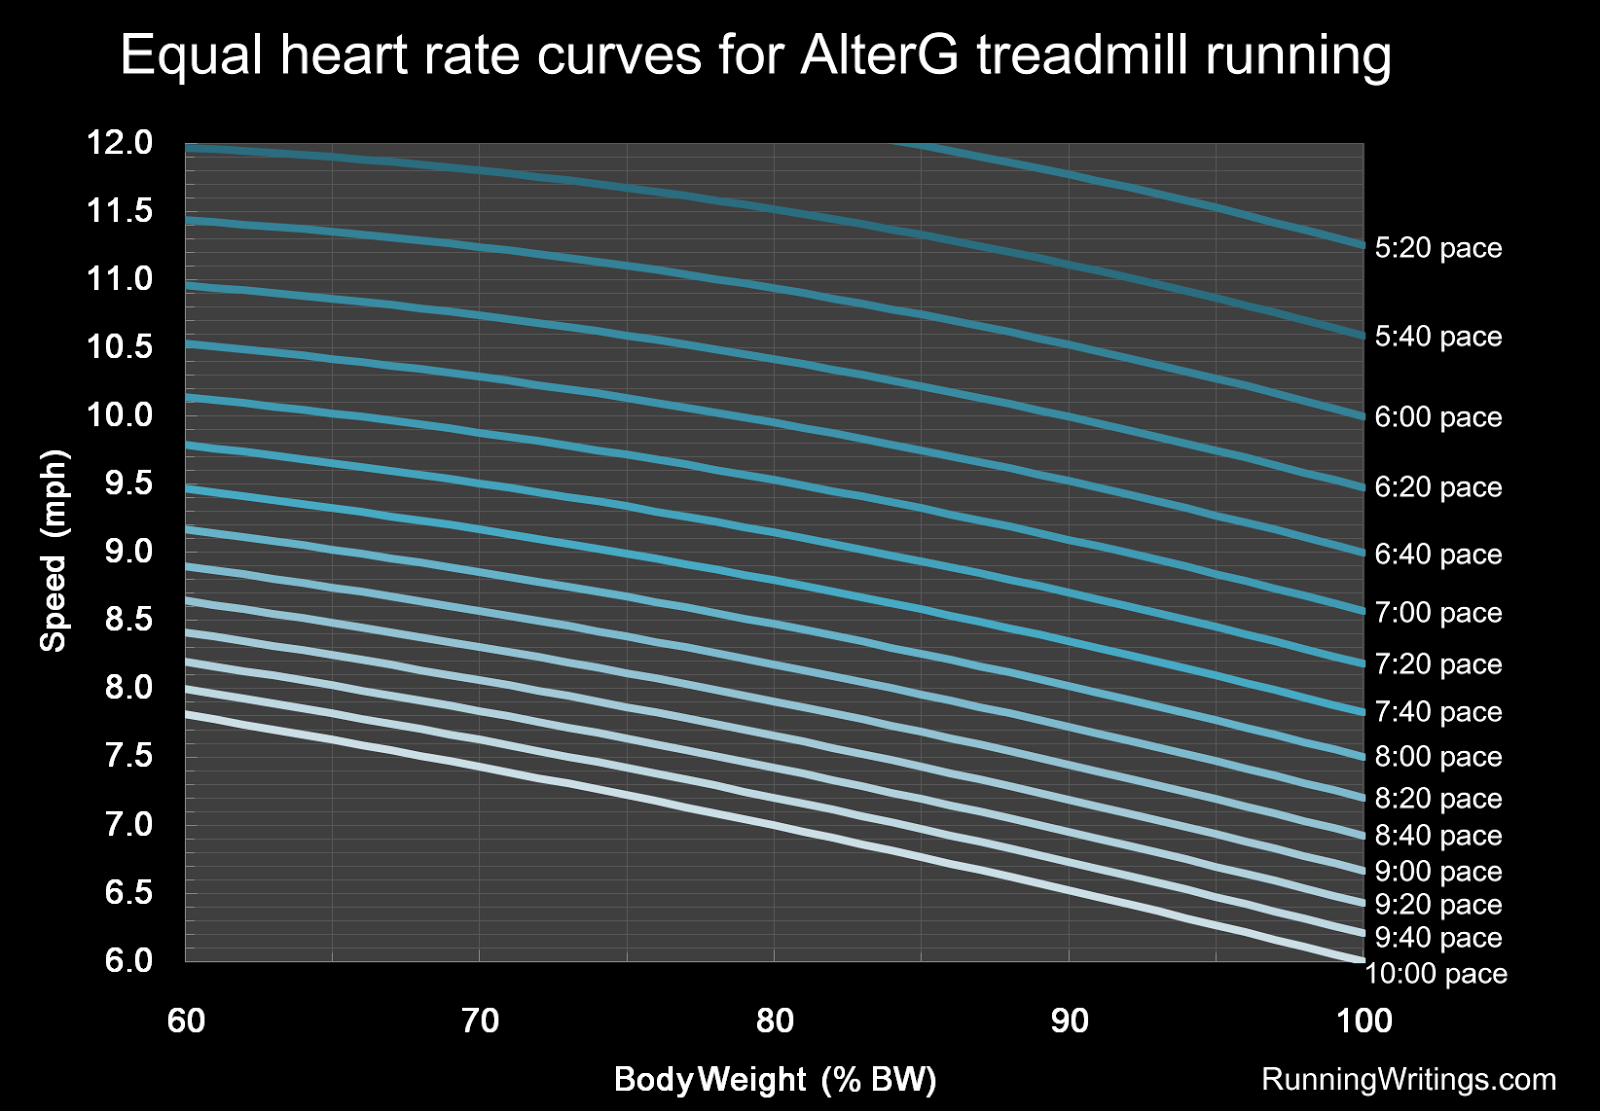 Running writings: How much easier is running on an AlterG ...